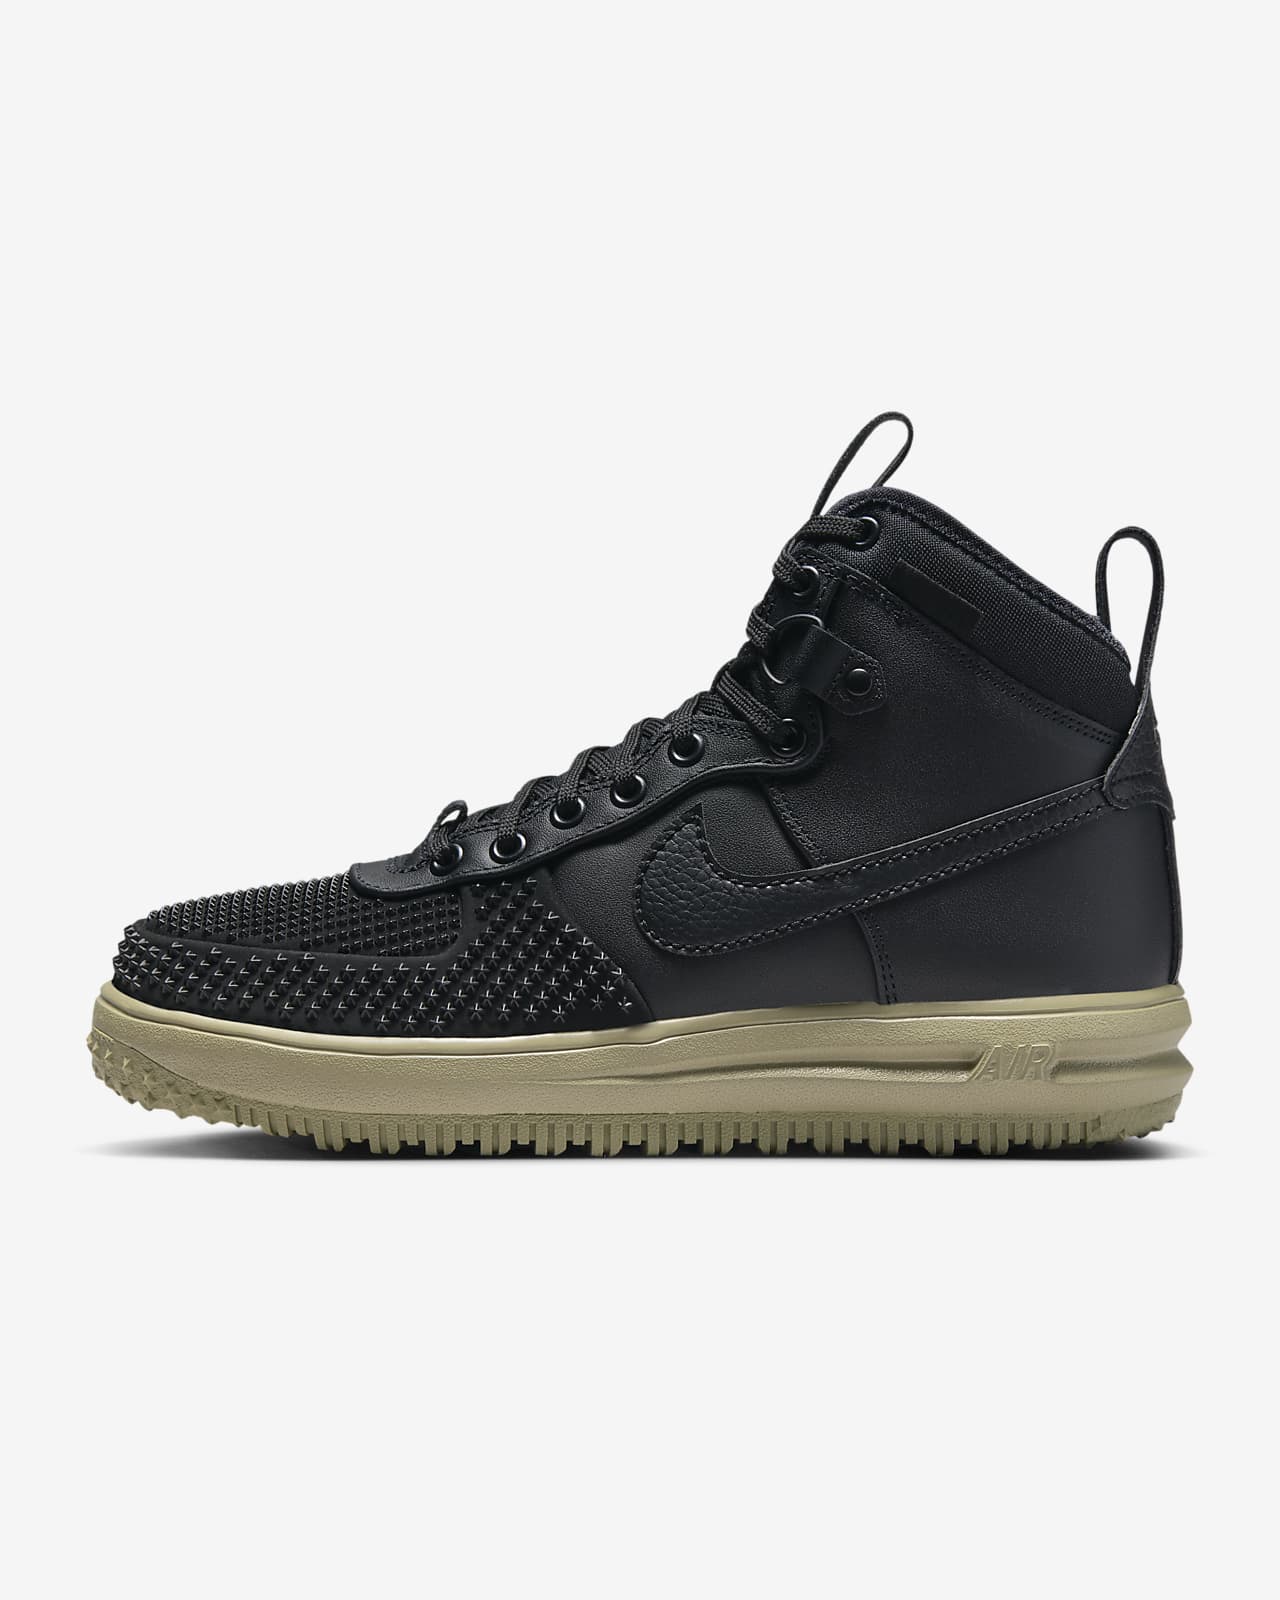 Duckboot Nike Lunar Force 1 pour homme